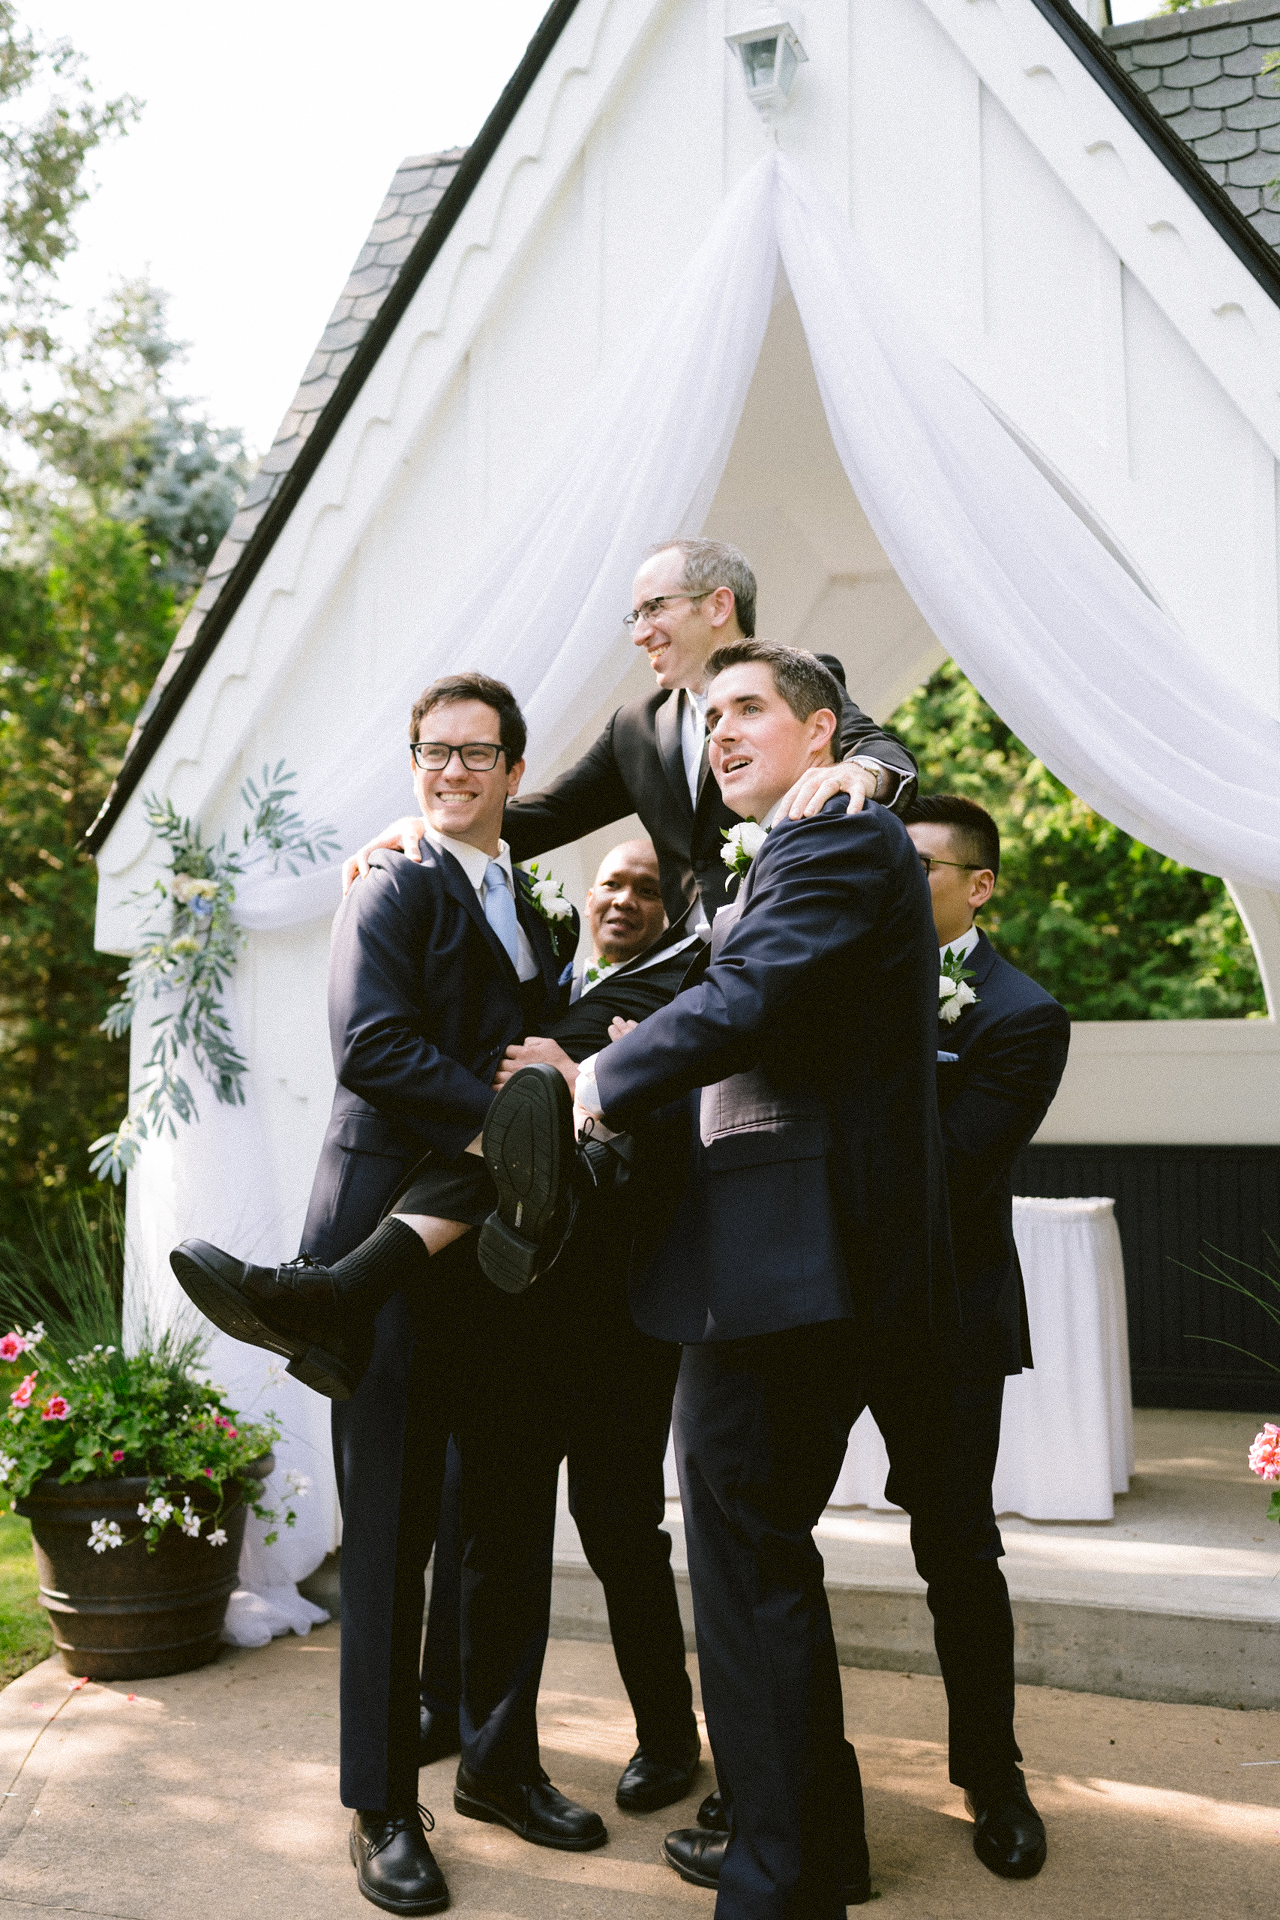 Groomsmen lifting the groom for a playful photo at a wedding ceremony.